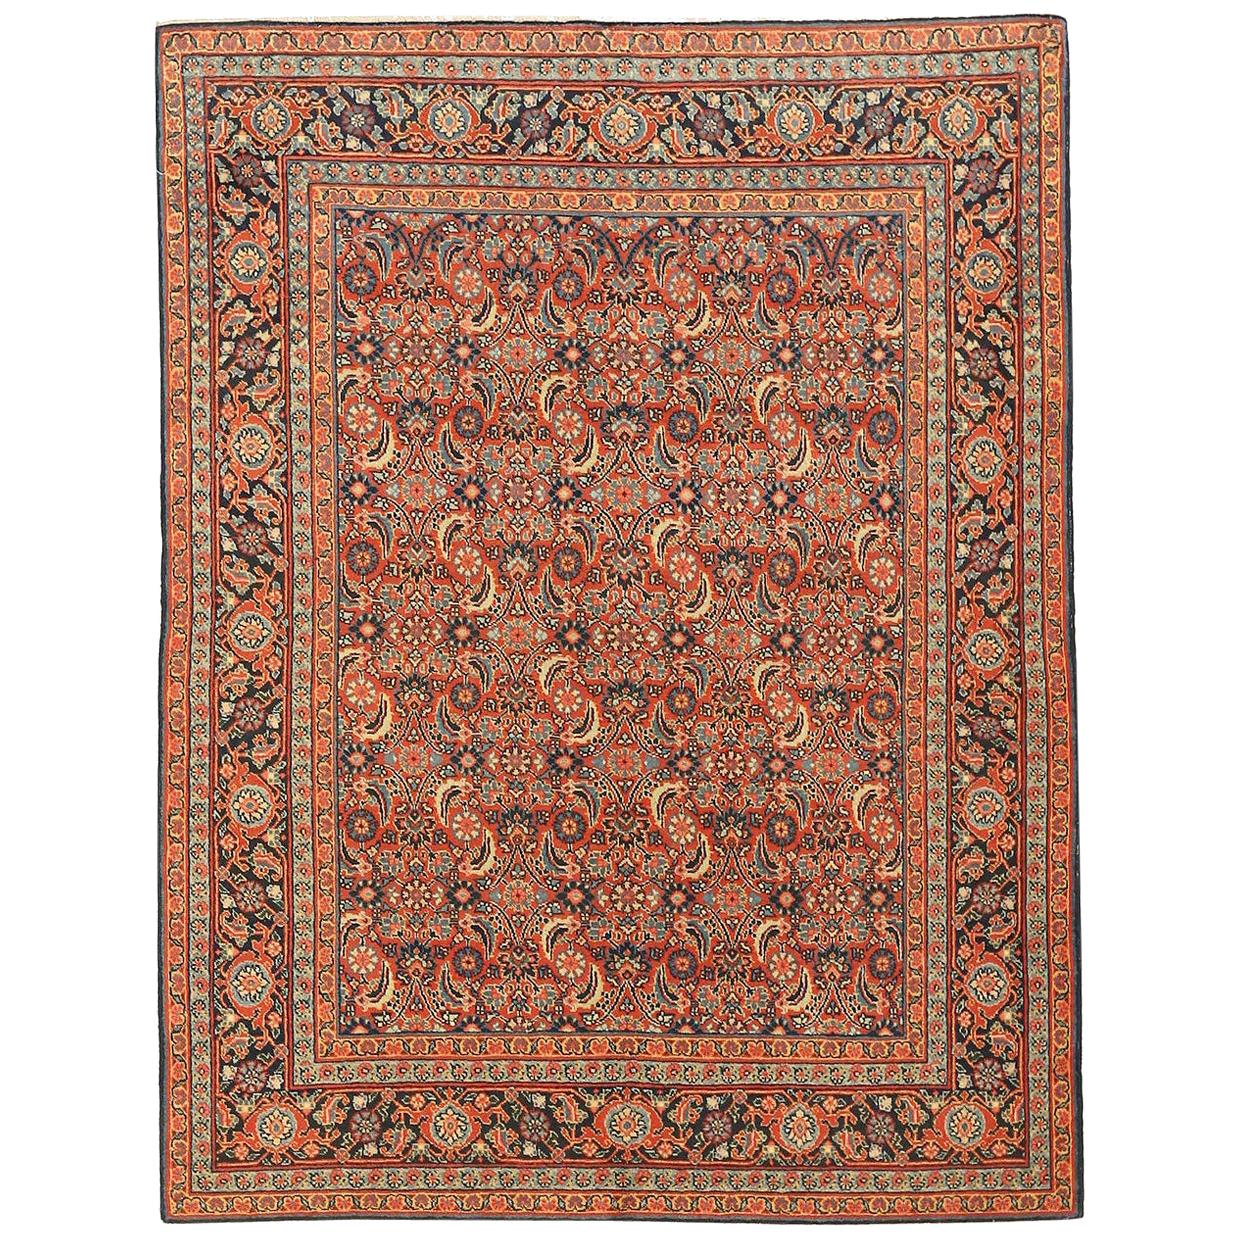 Antique Persian Tabriz Rug with Gray and Black Flower Details on Beige Field